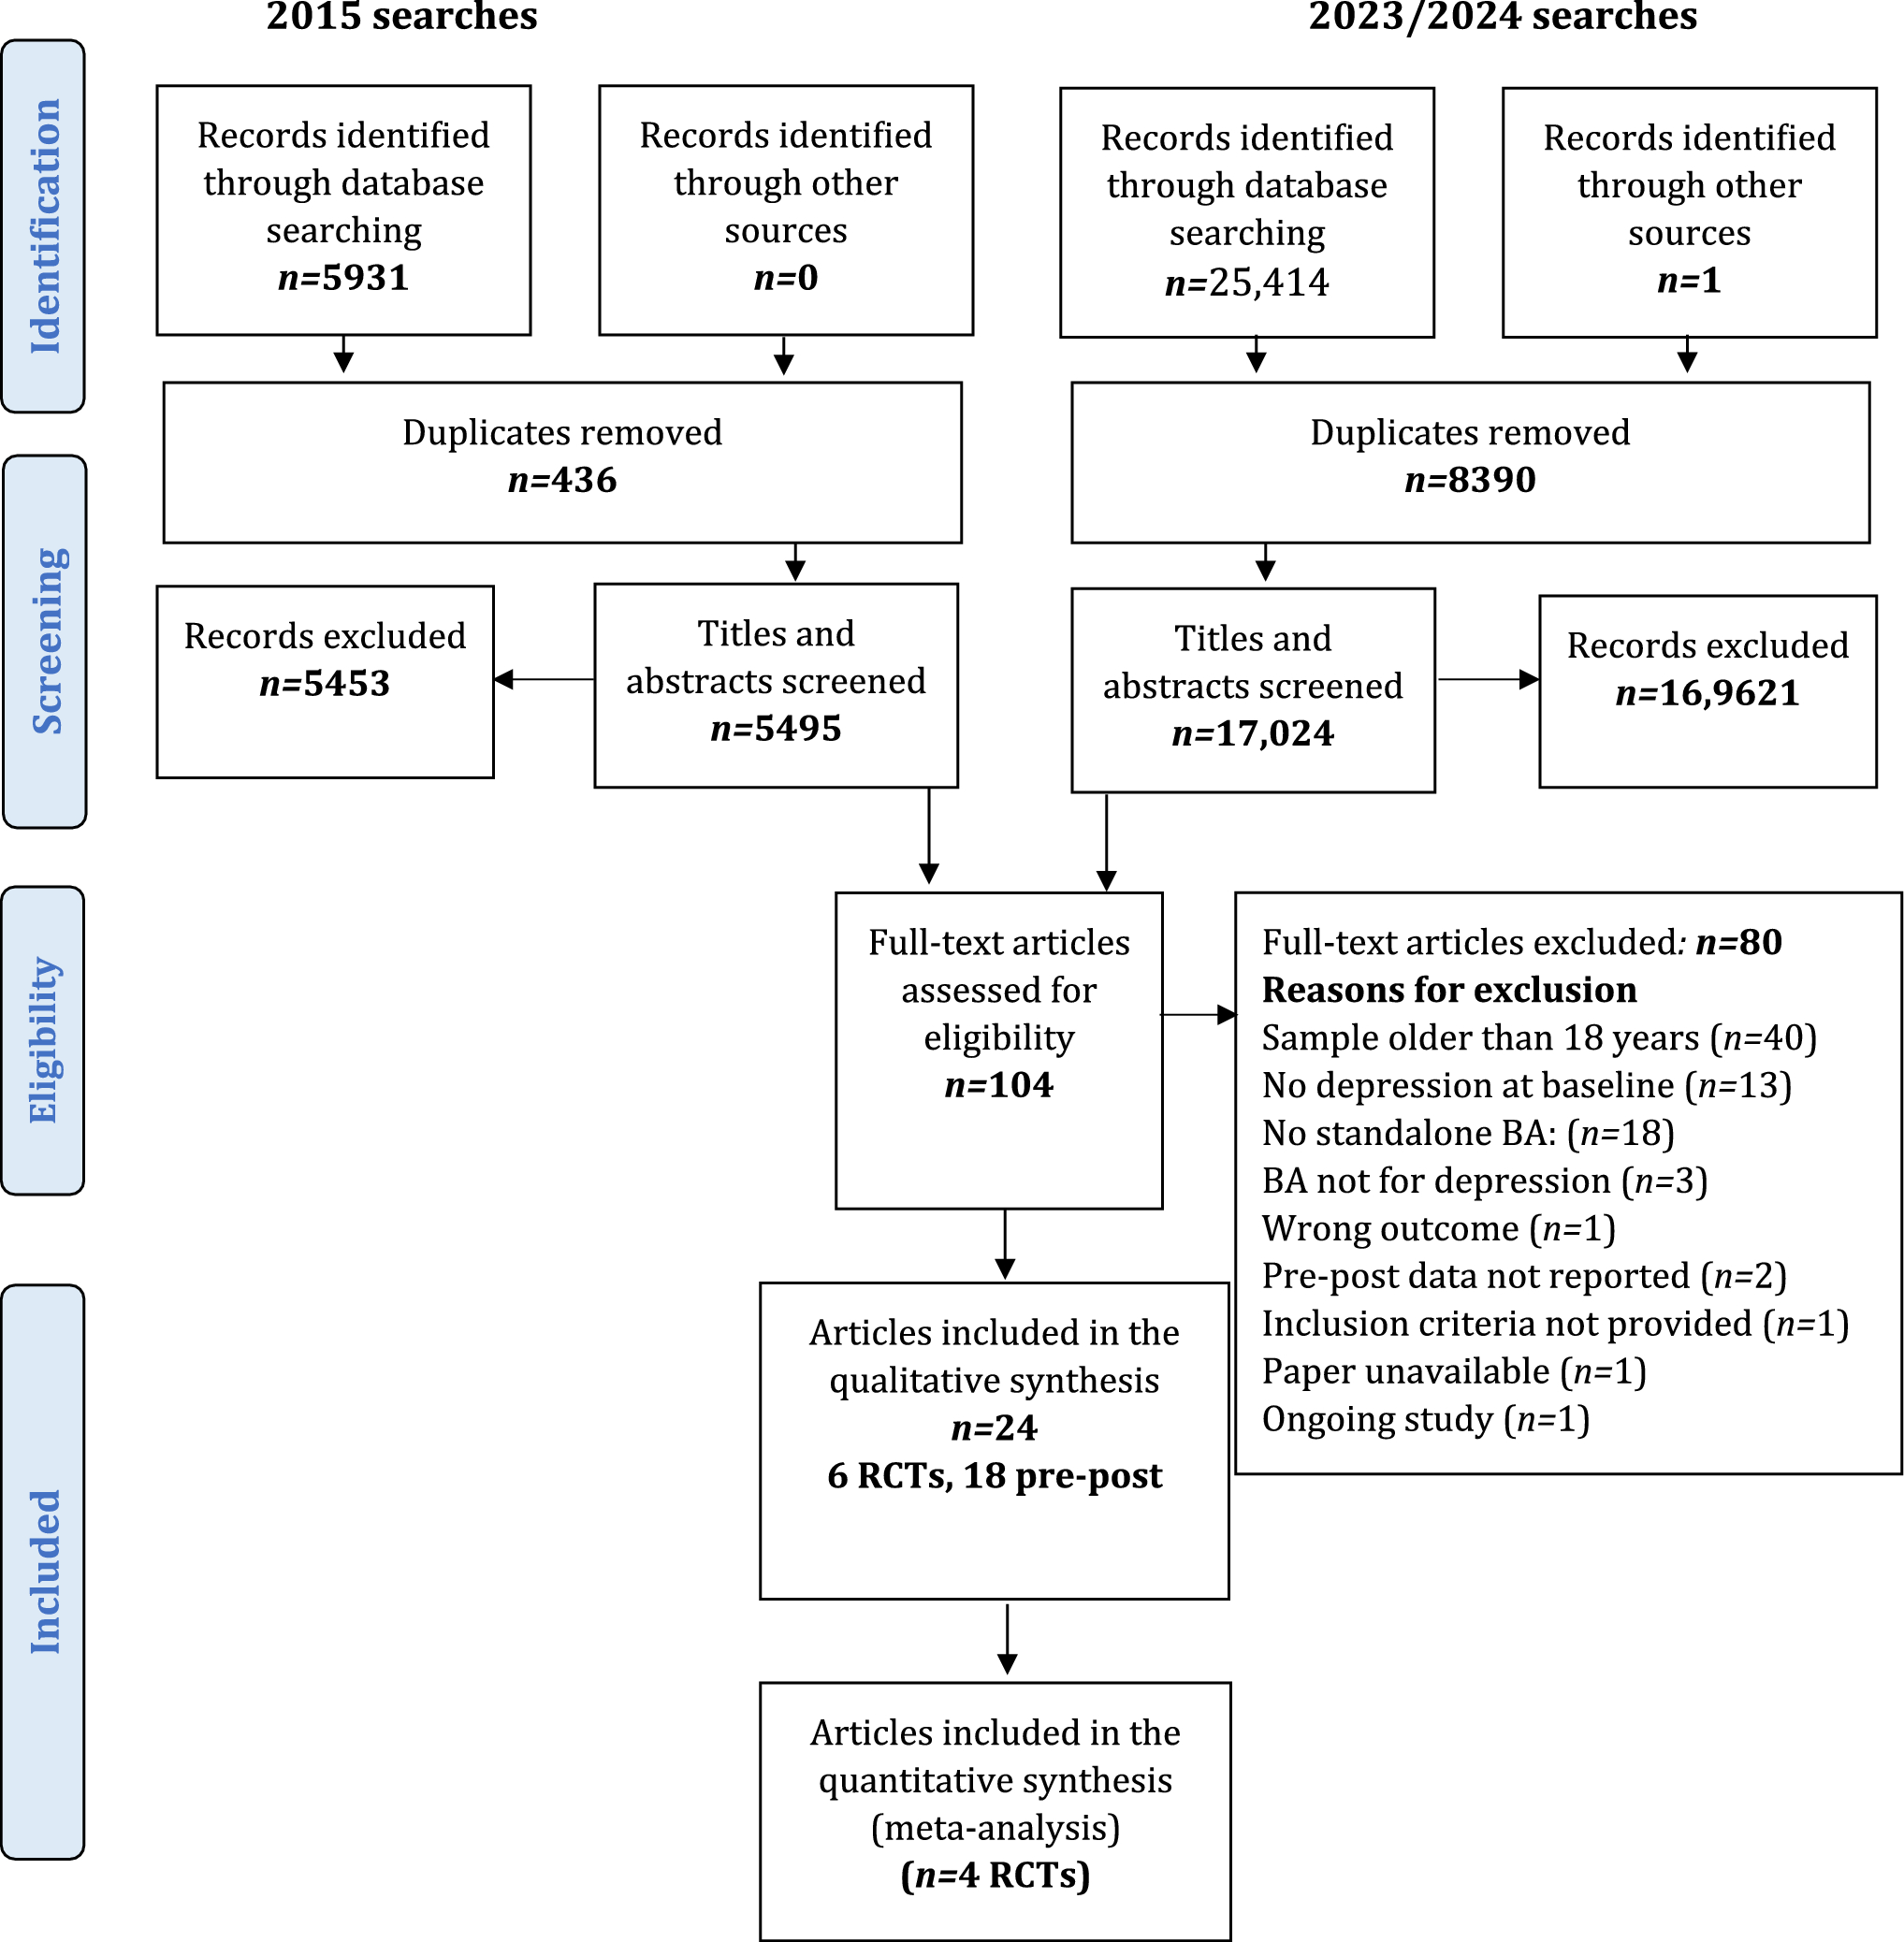 Is behavioural activation an effective treatment for depression in children and adolescents? An updated systematic review and meta-analysis